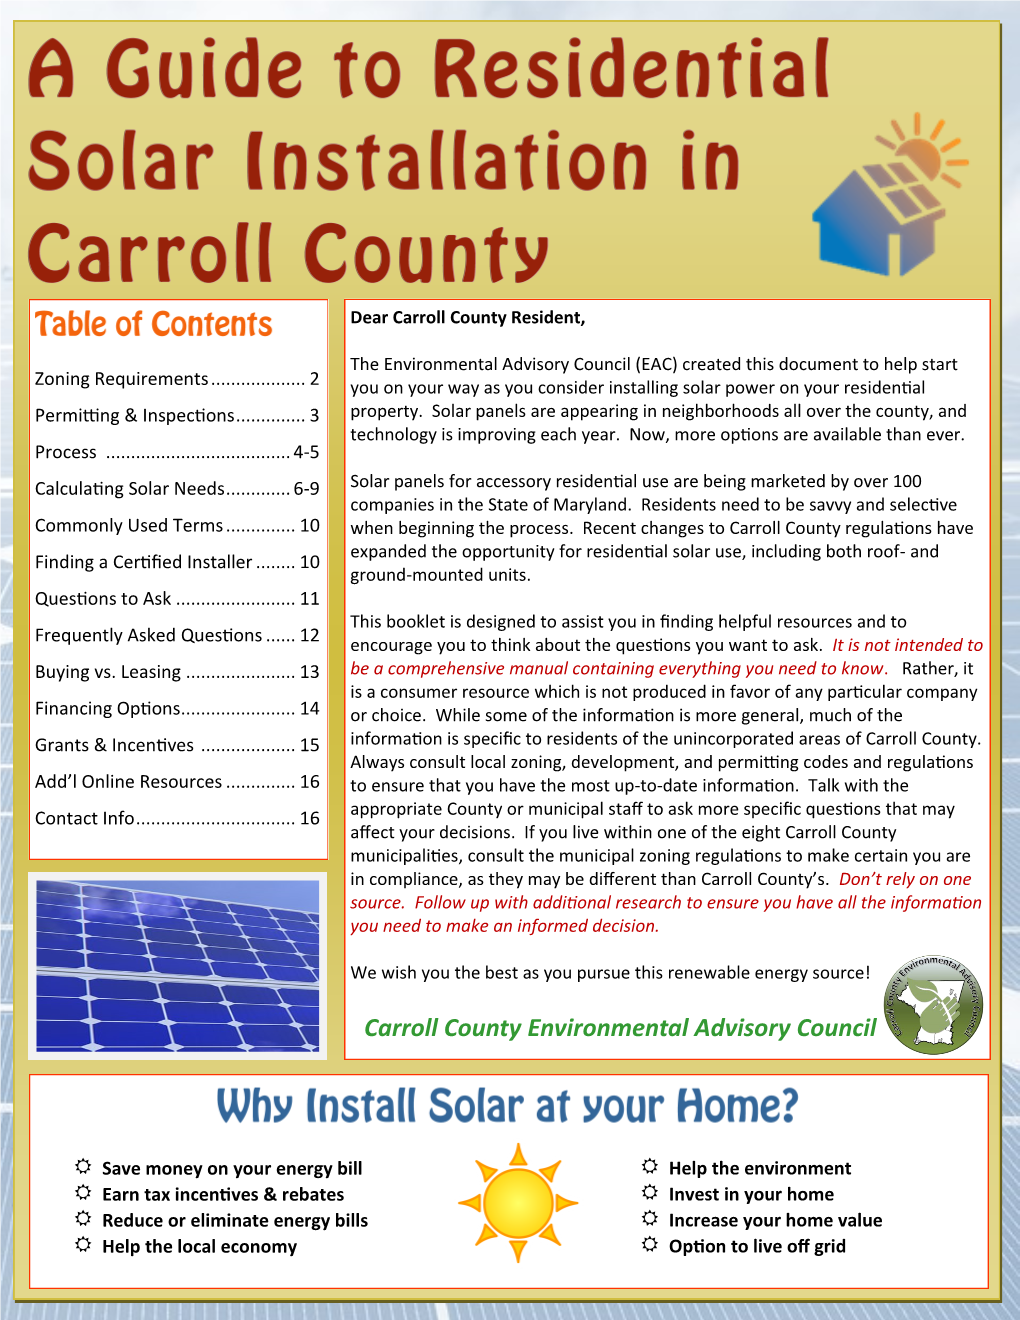 A Guide to Residential Solar Installation in Carroll County